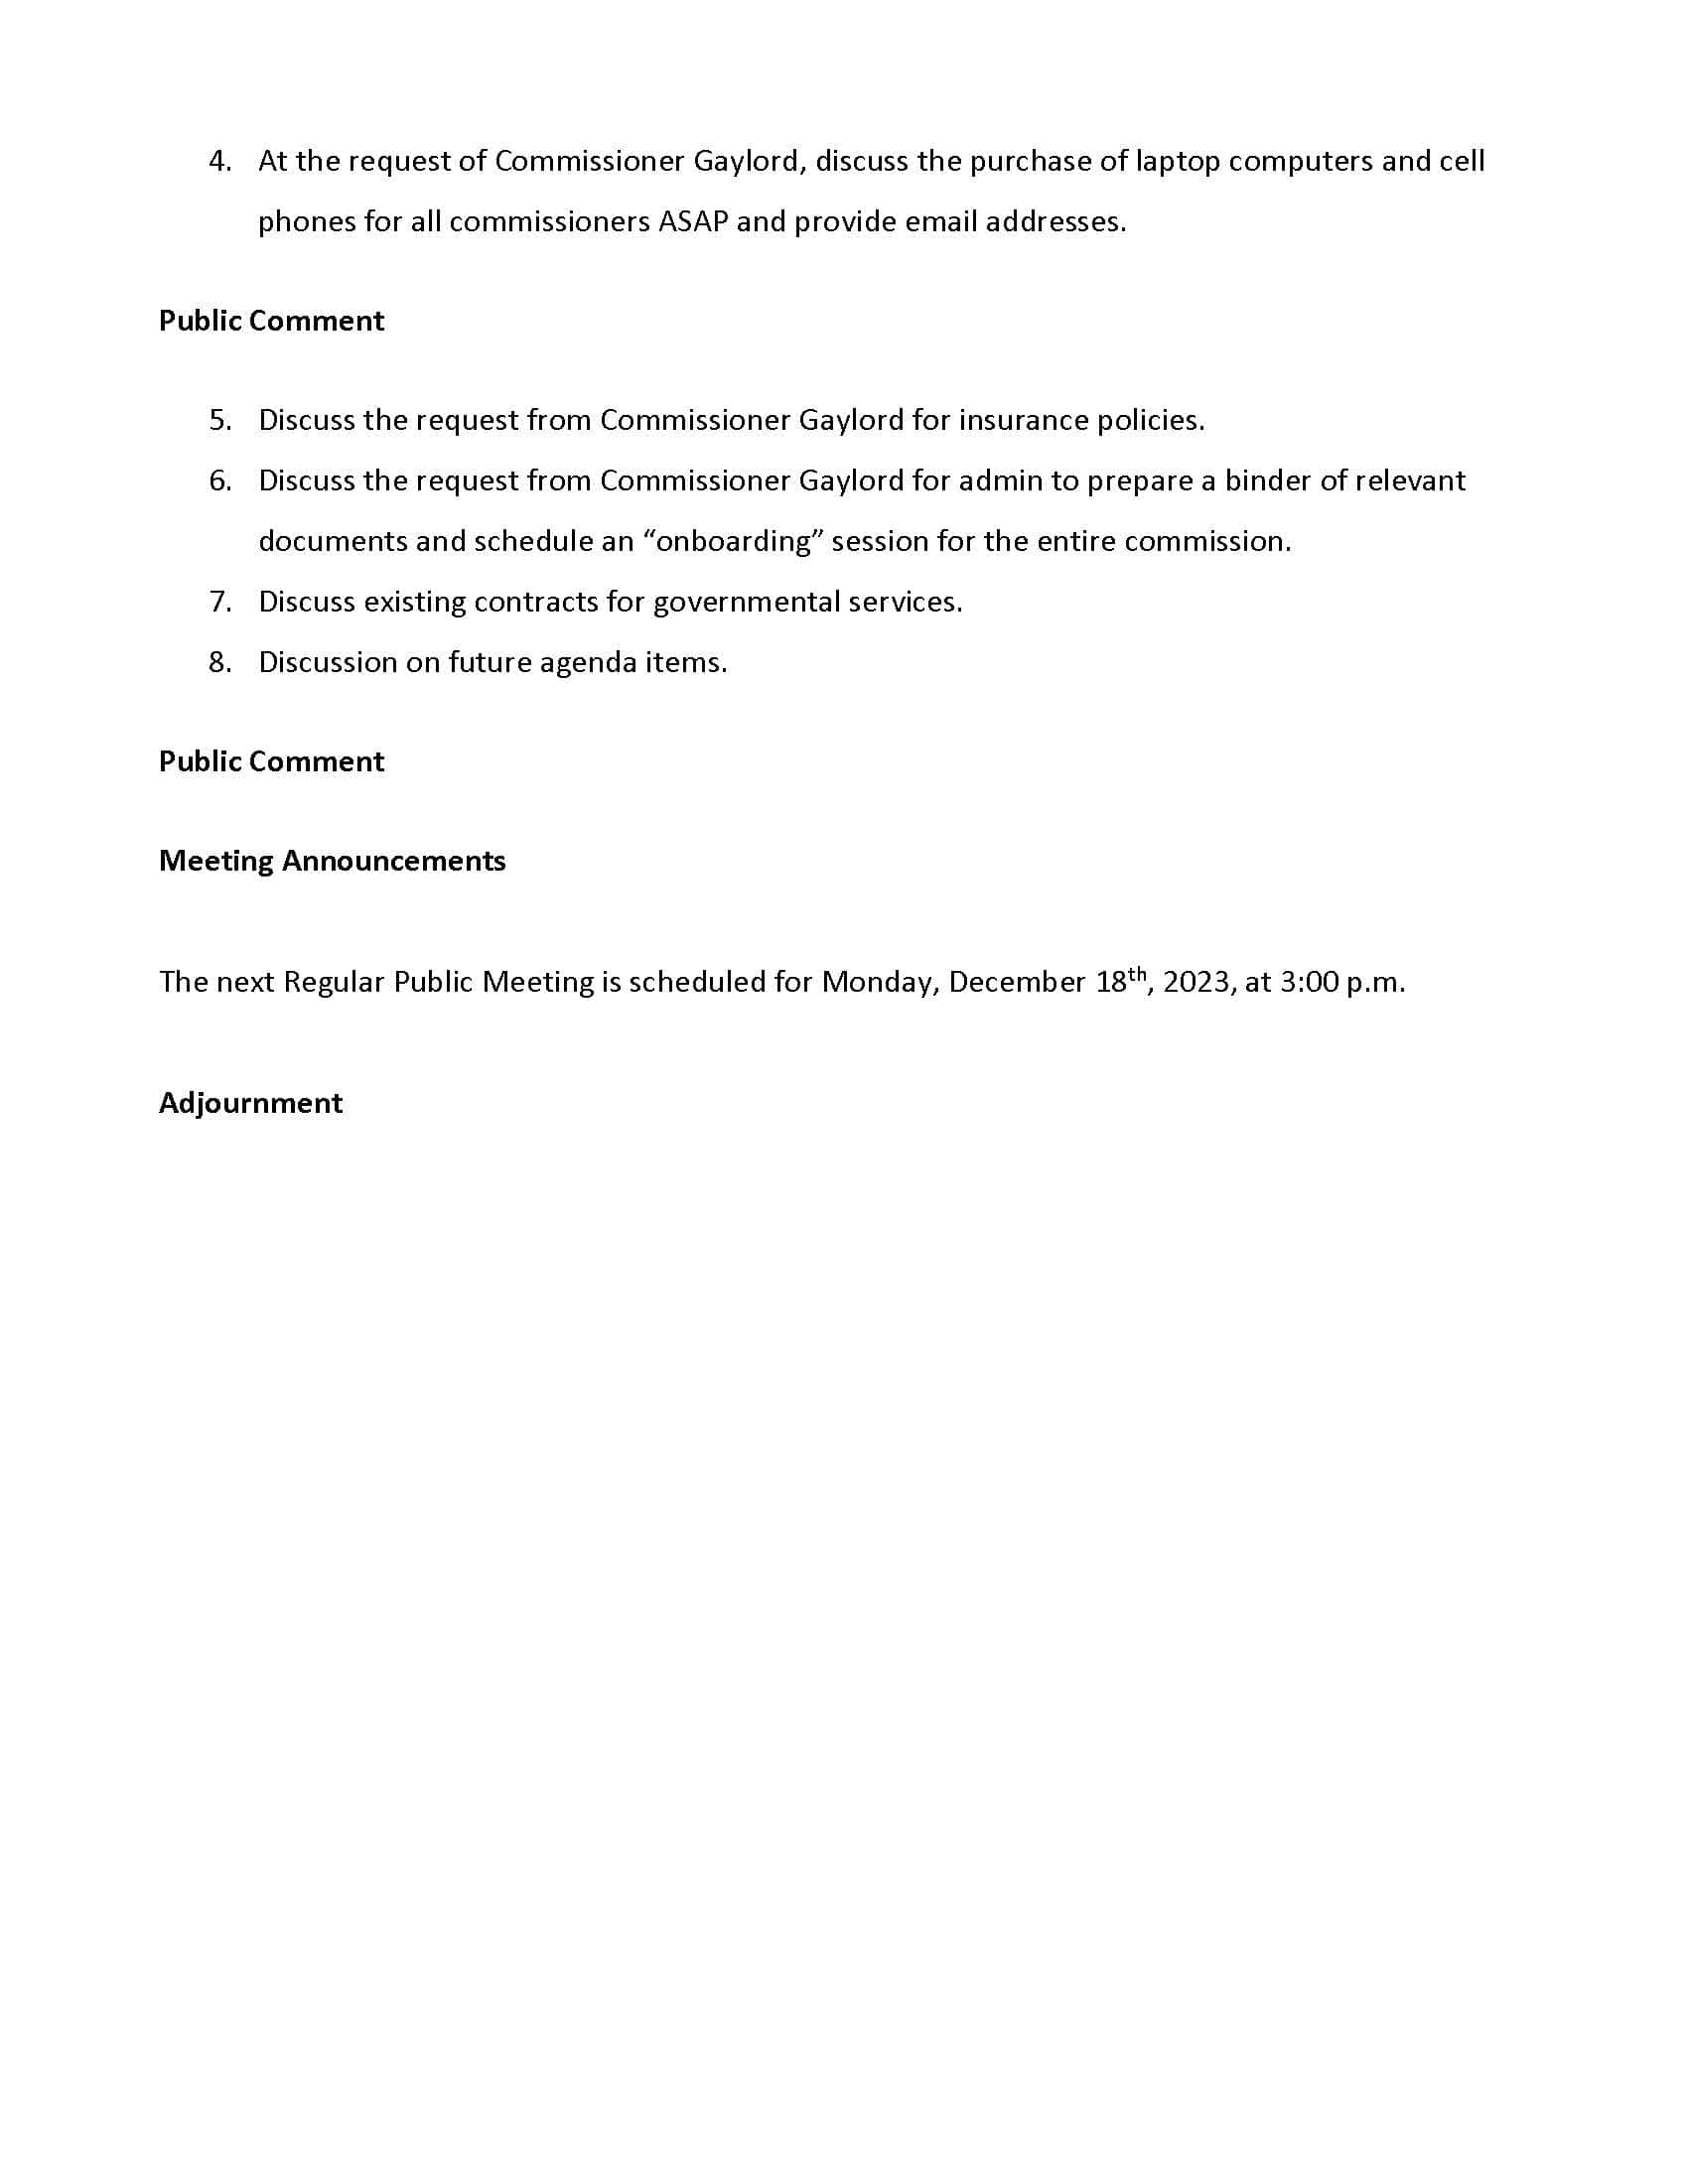 2023-12-05 Special Meeting Agenda_Page_2